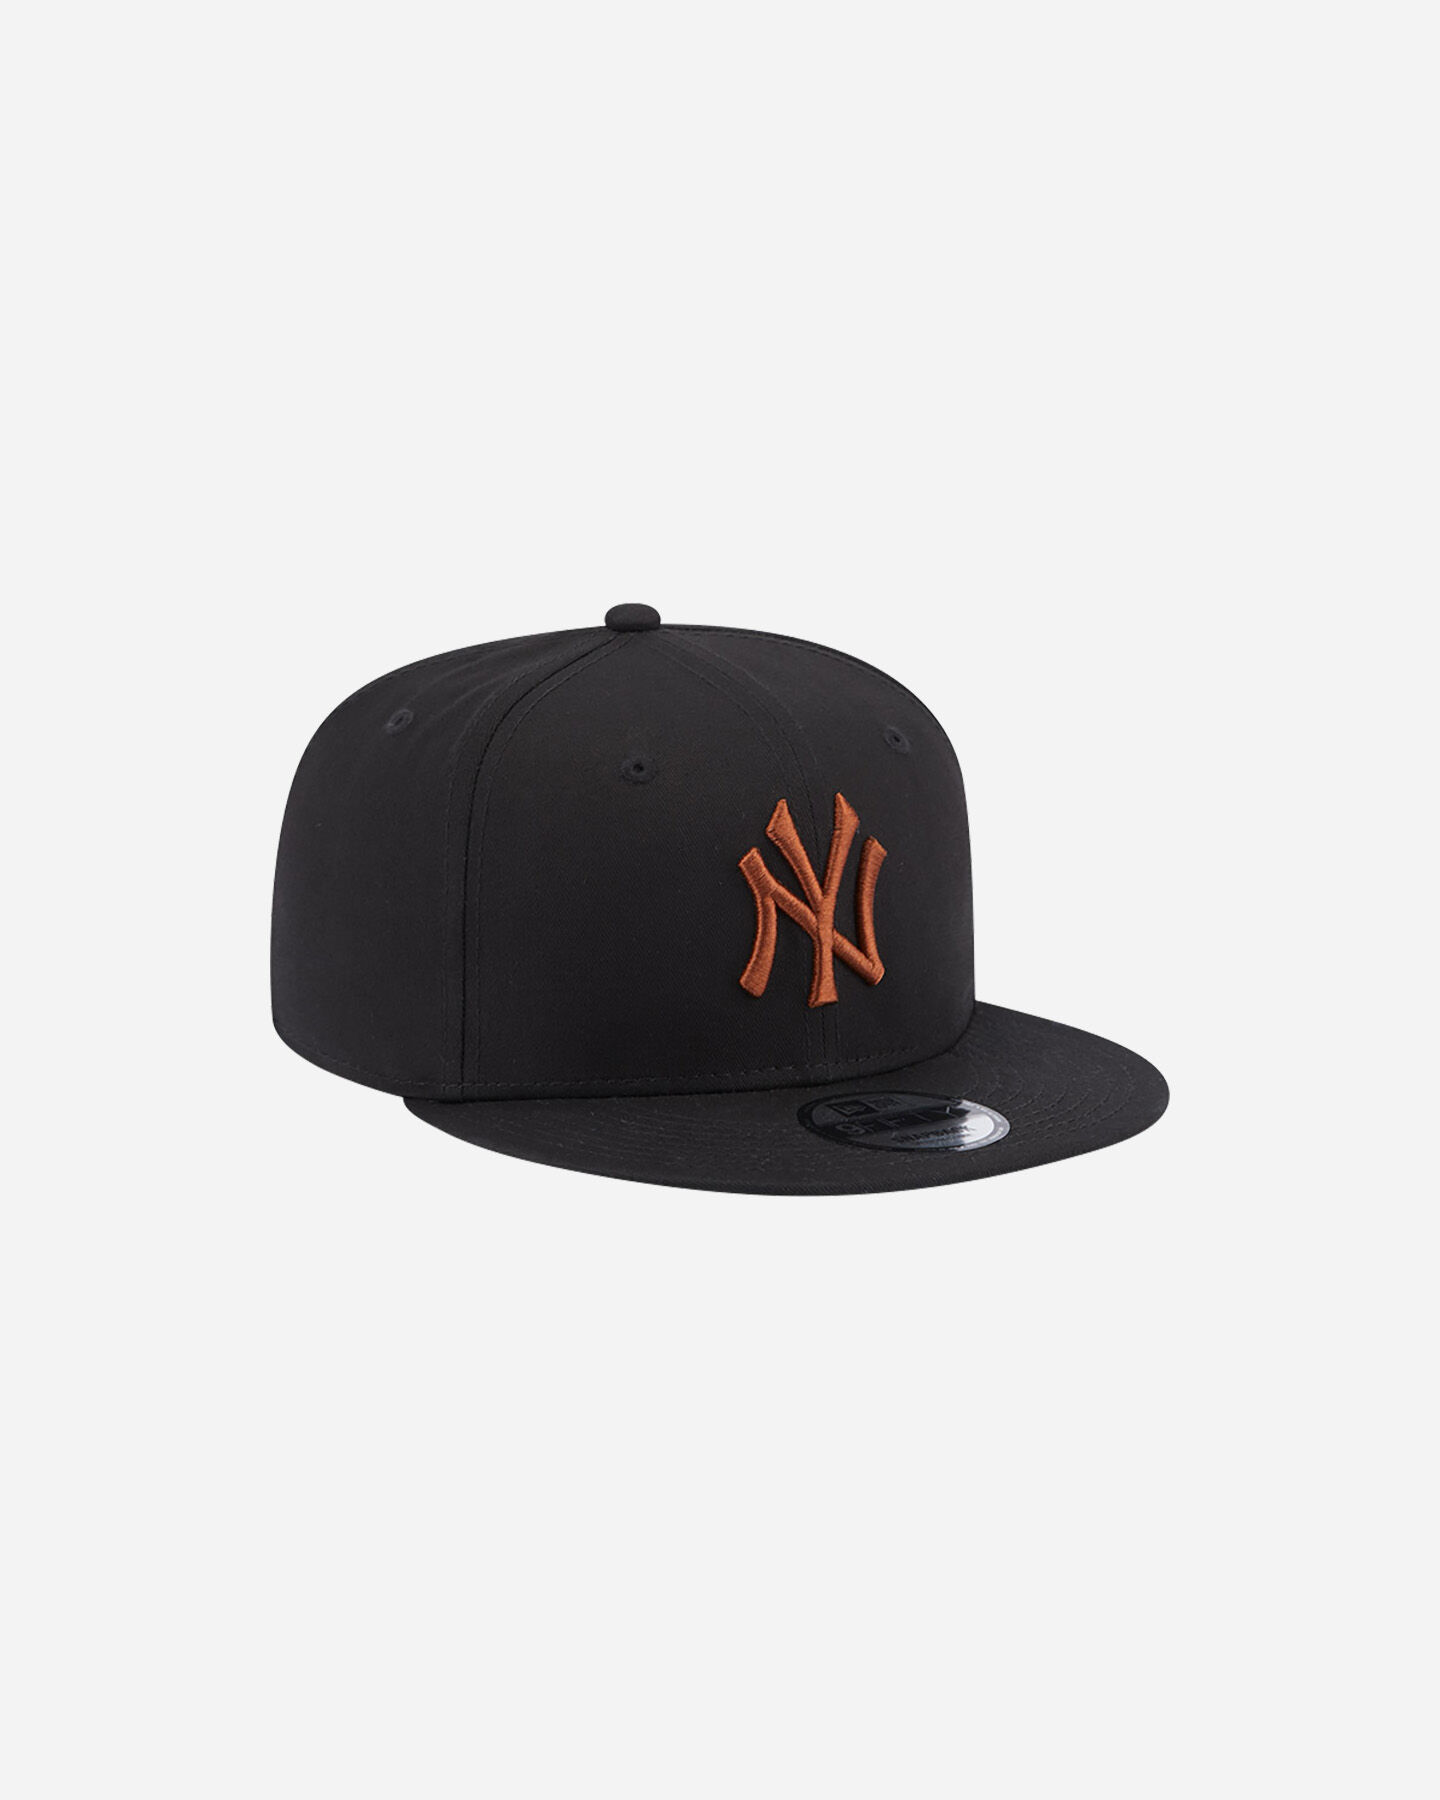  Cappellino NEW ERA 9FIFTY MLB LEAGUE NEW YORK YANKEES  S5606265|001|SM scatto 2